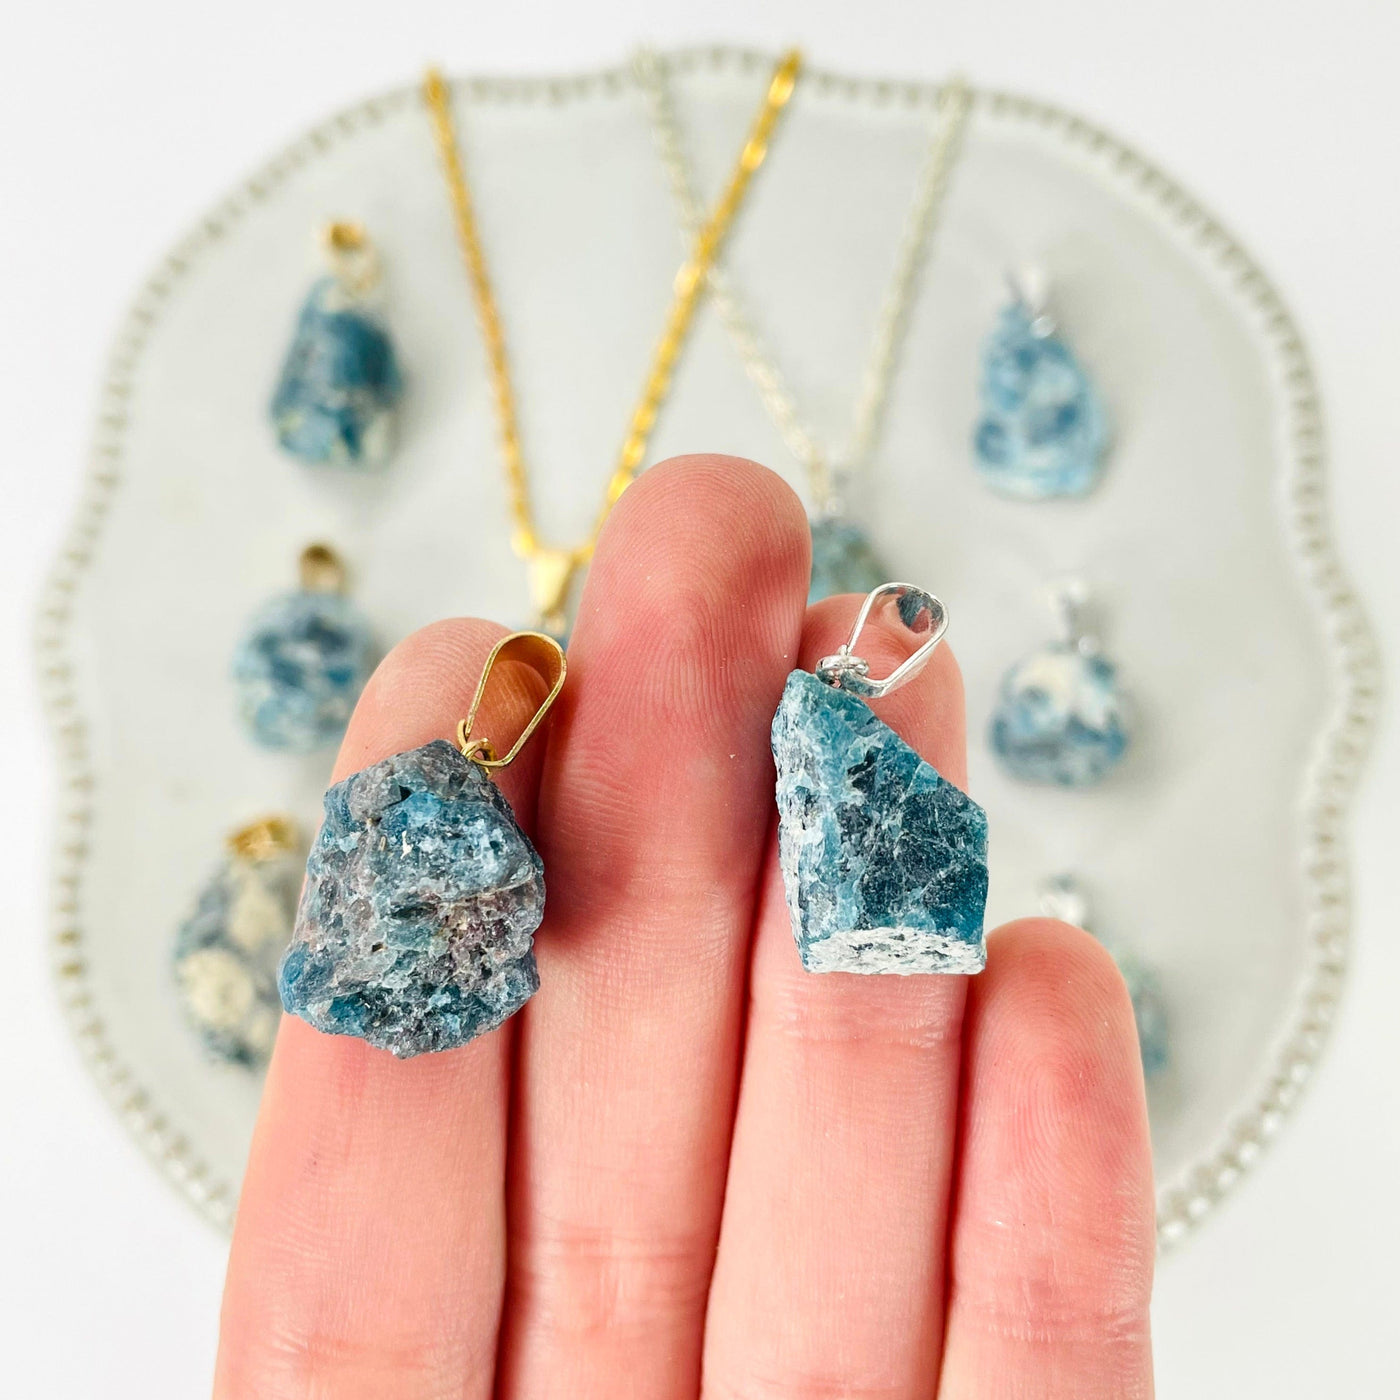 close up of one of each raw blue apatite chunk pendant finish options in hand for finish comparison and size reference